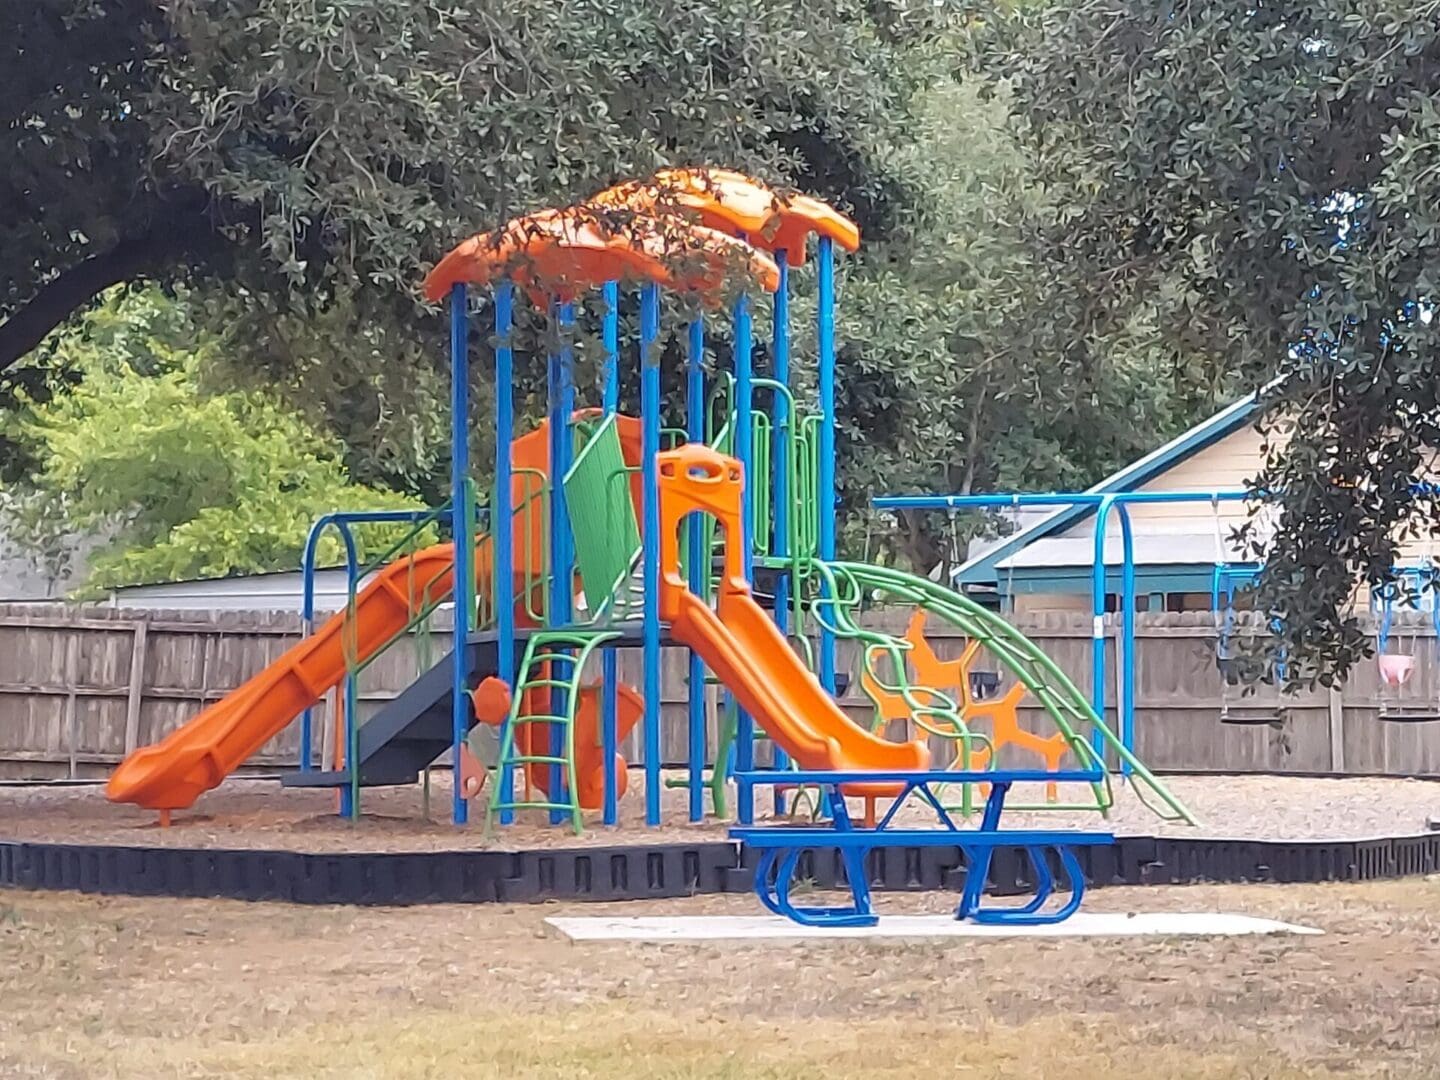 A playground with slides and swings in the middle of a park.